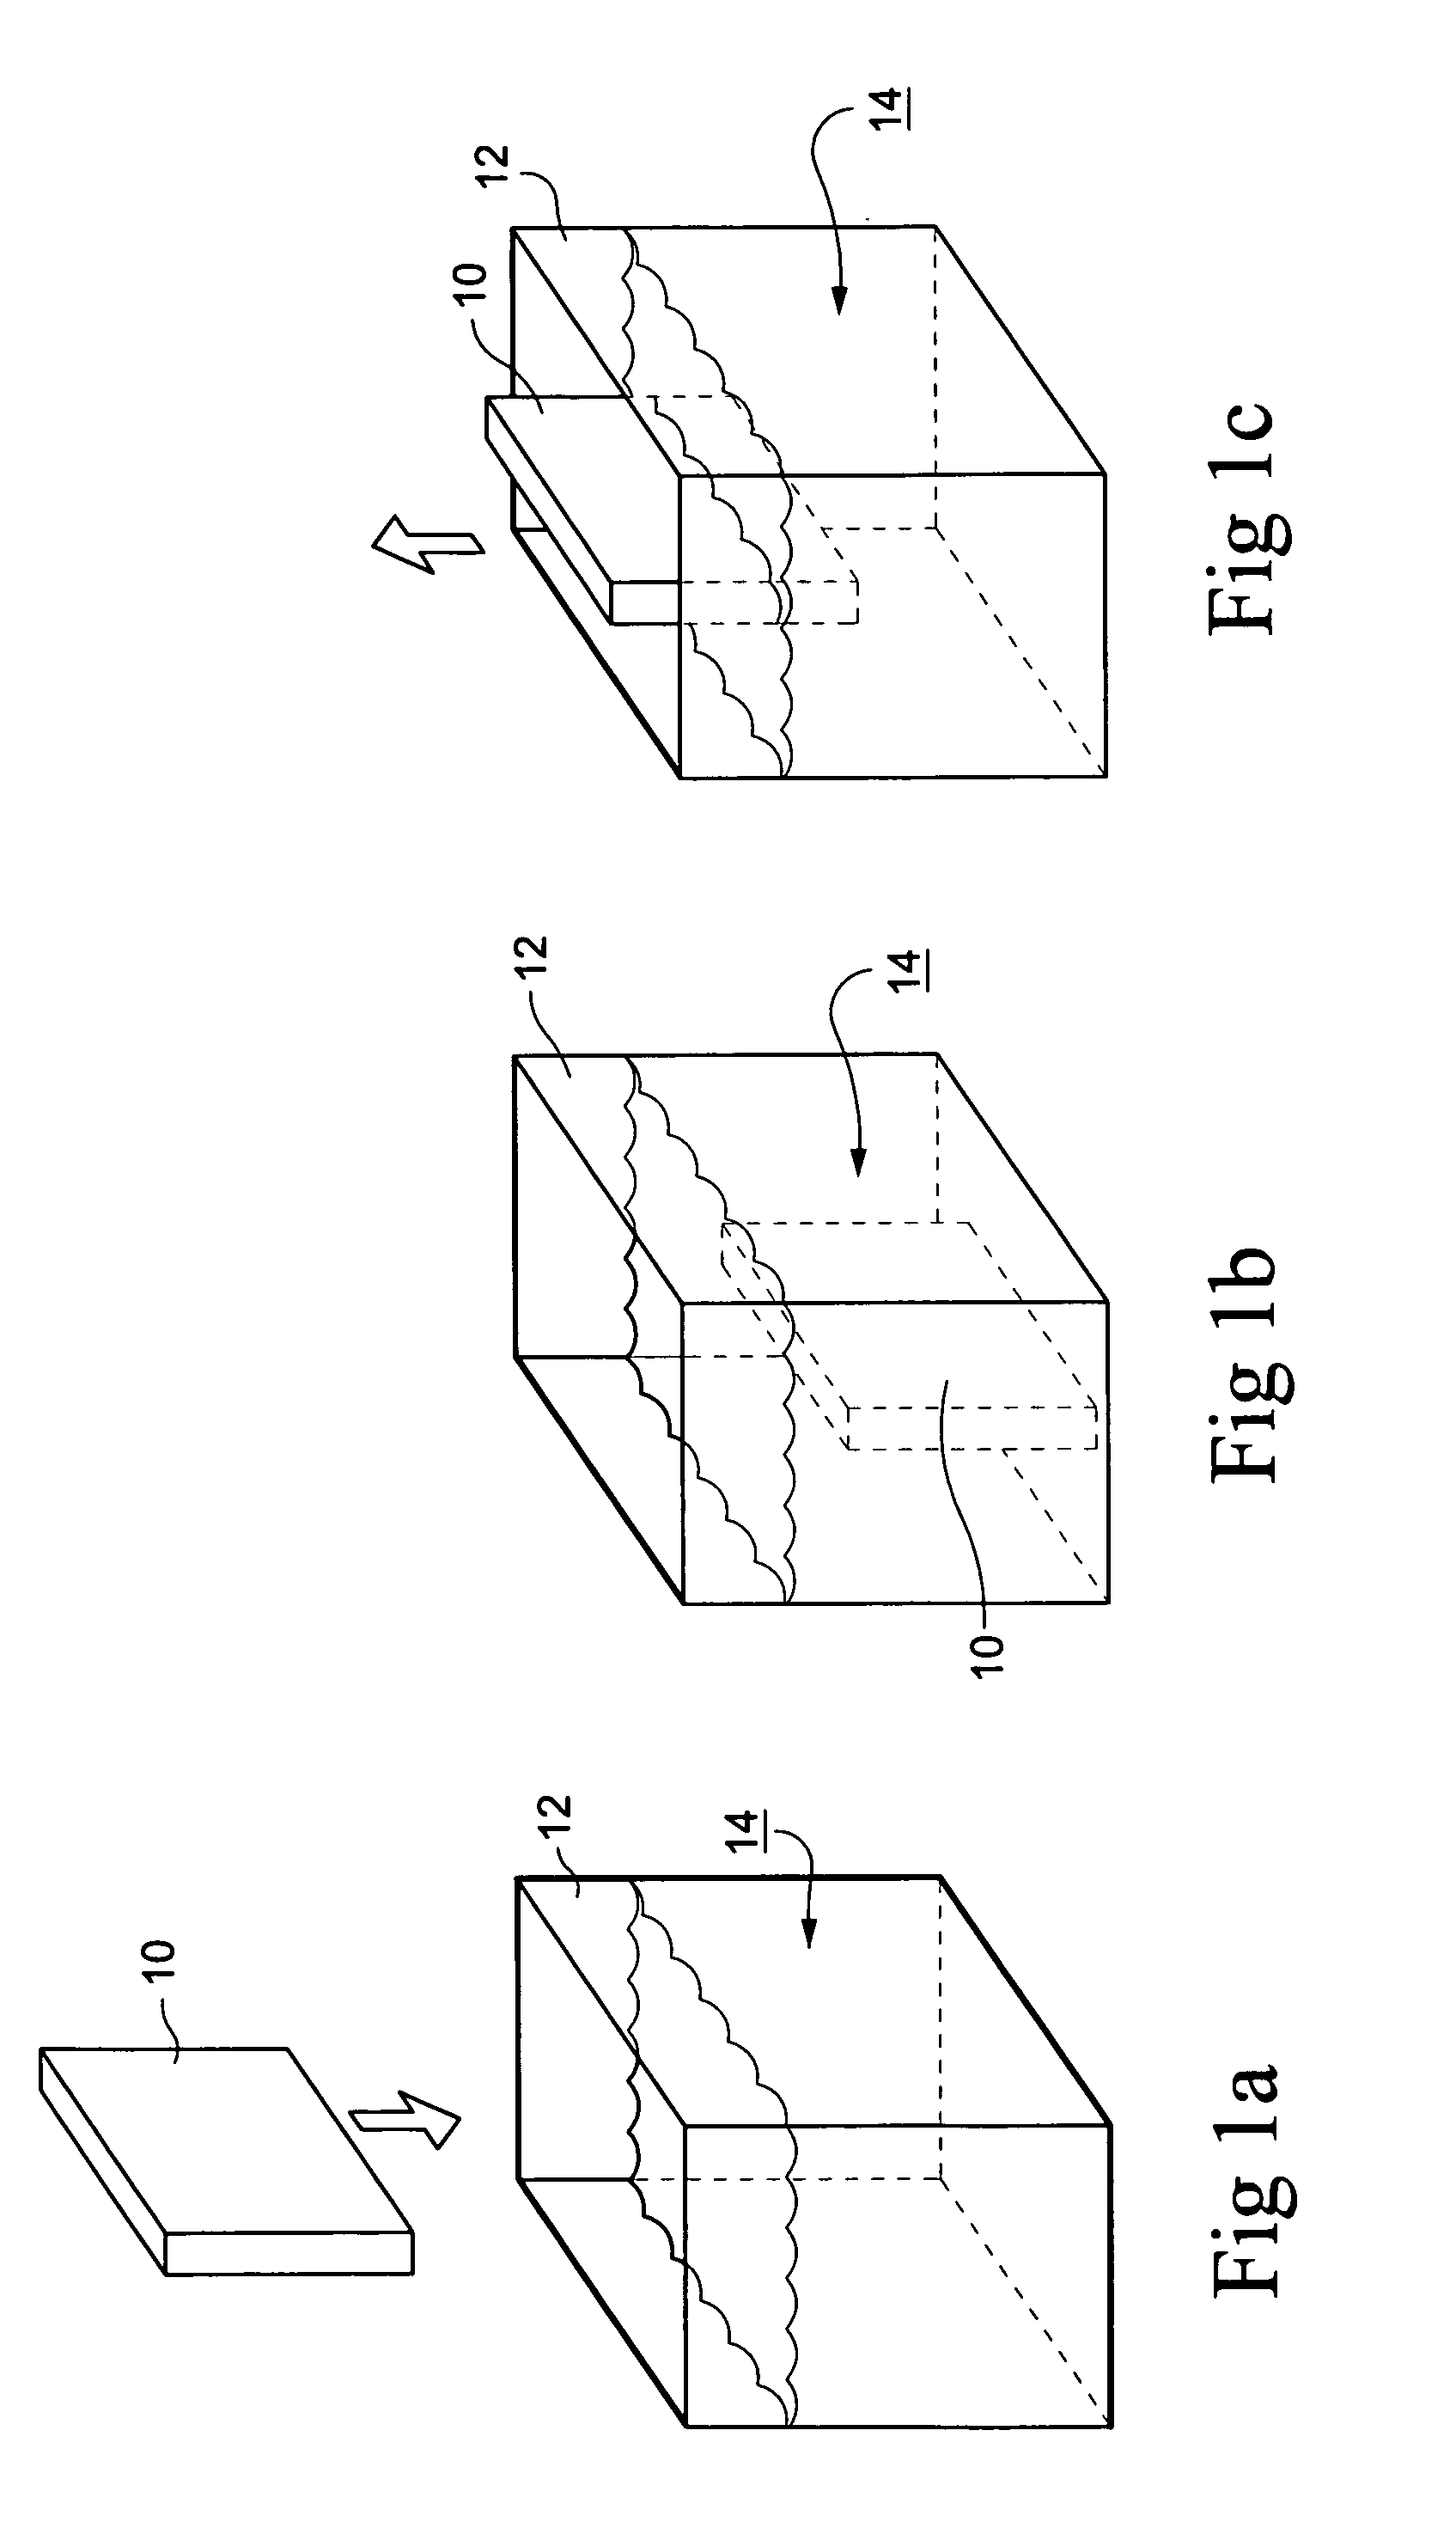 Draw-off coating apparatus for making coating articles, and/or methods of making coated articles using the same